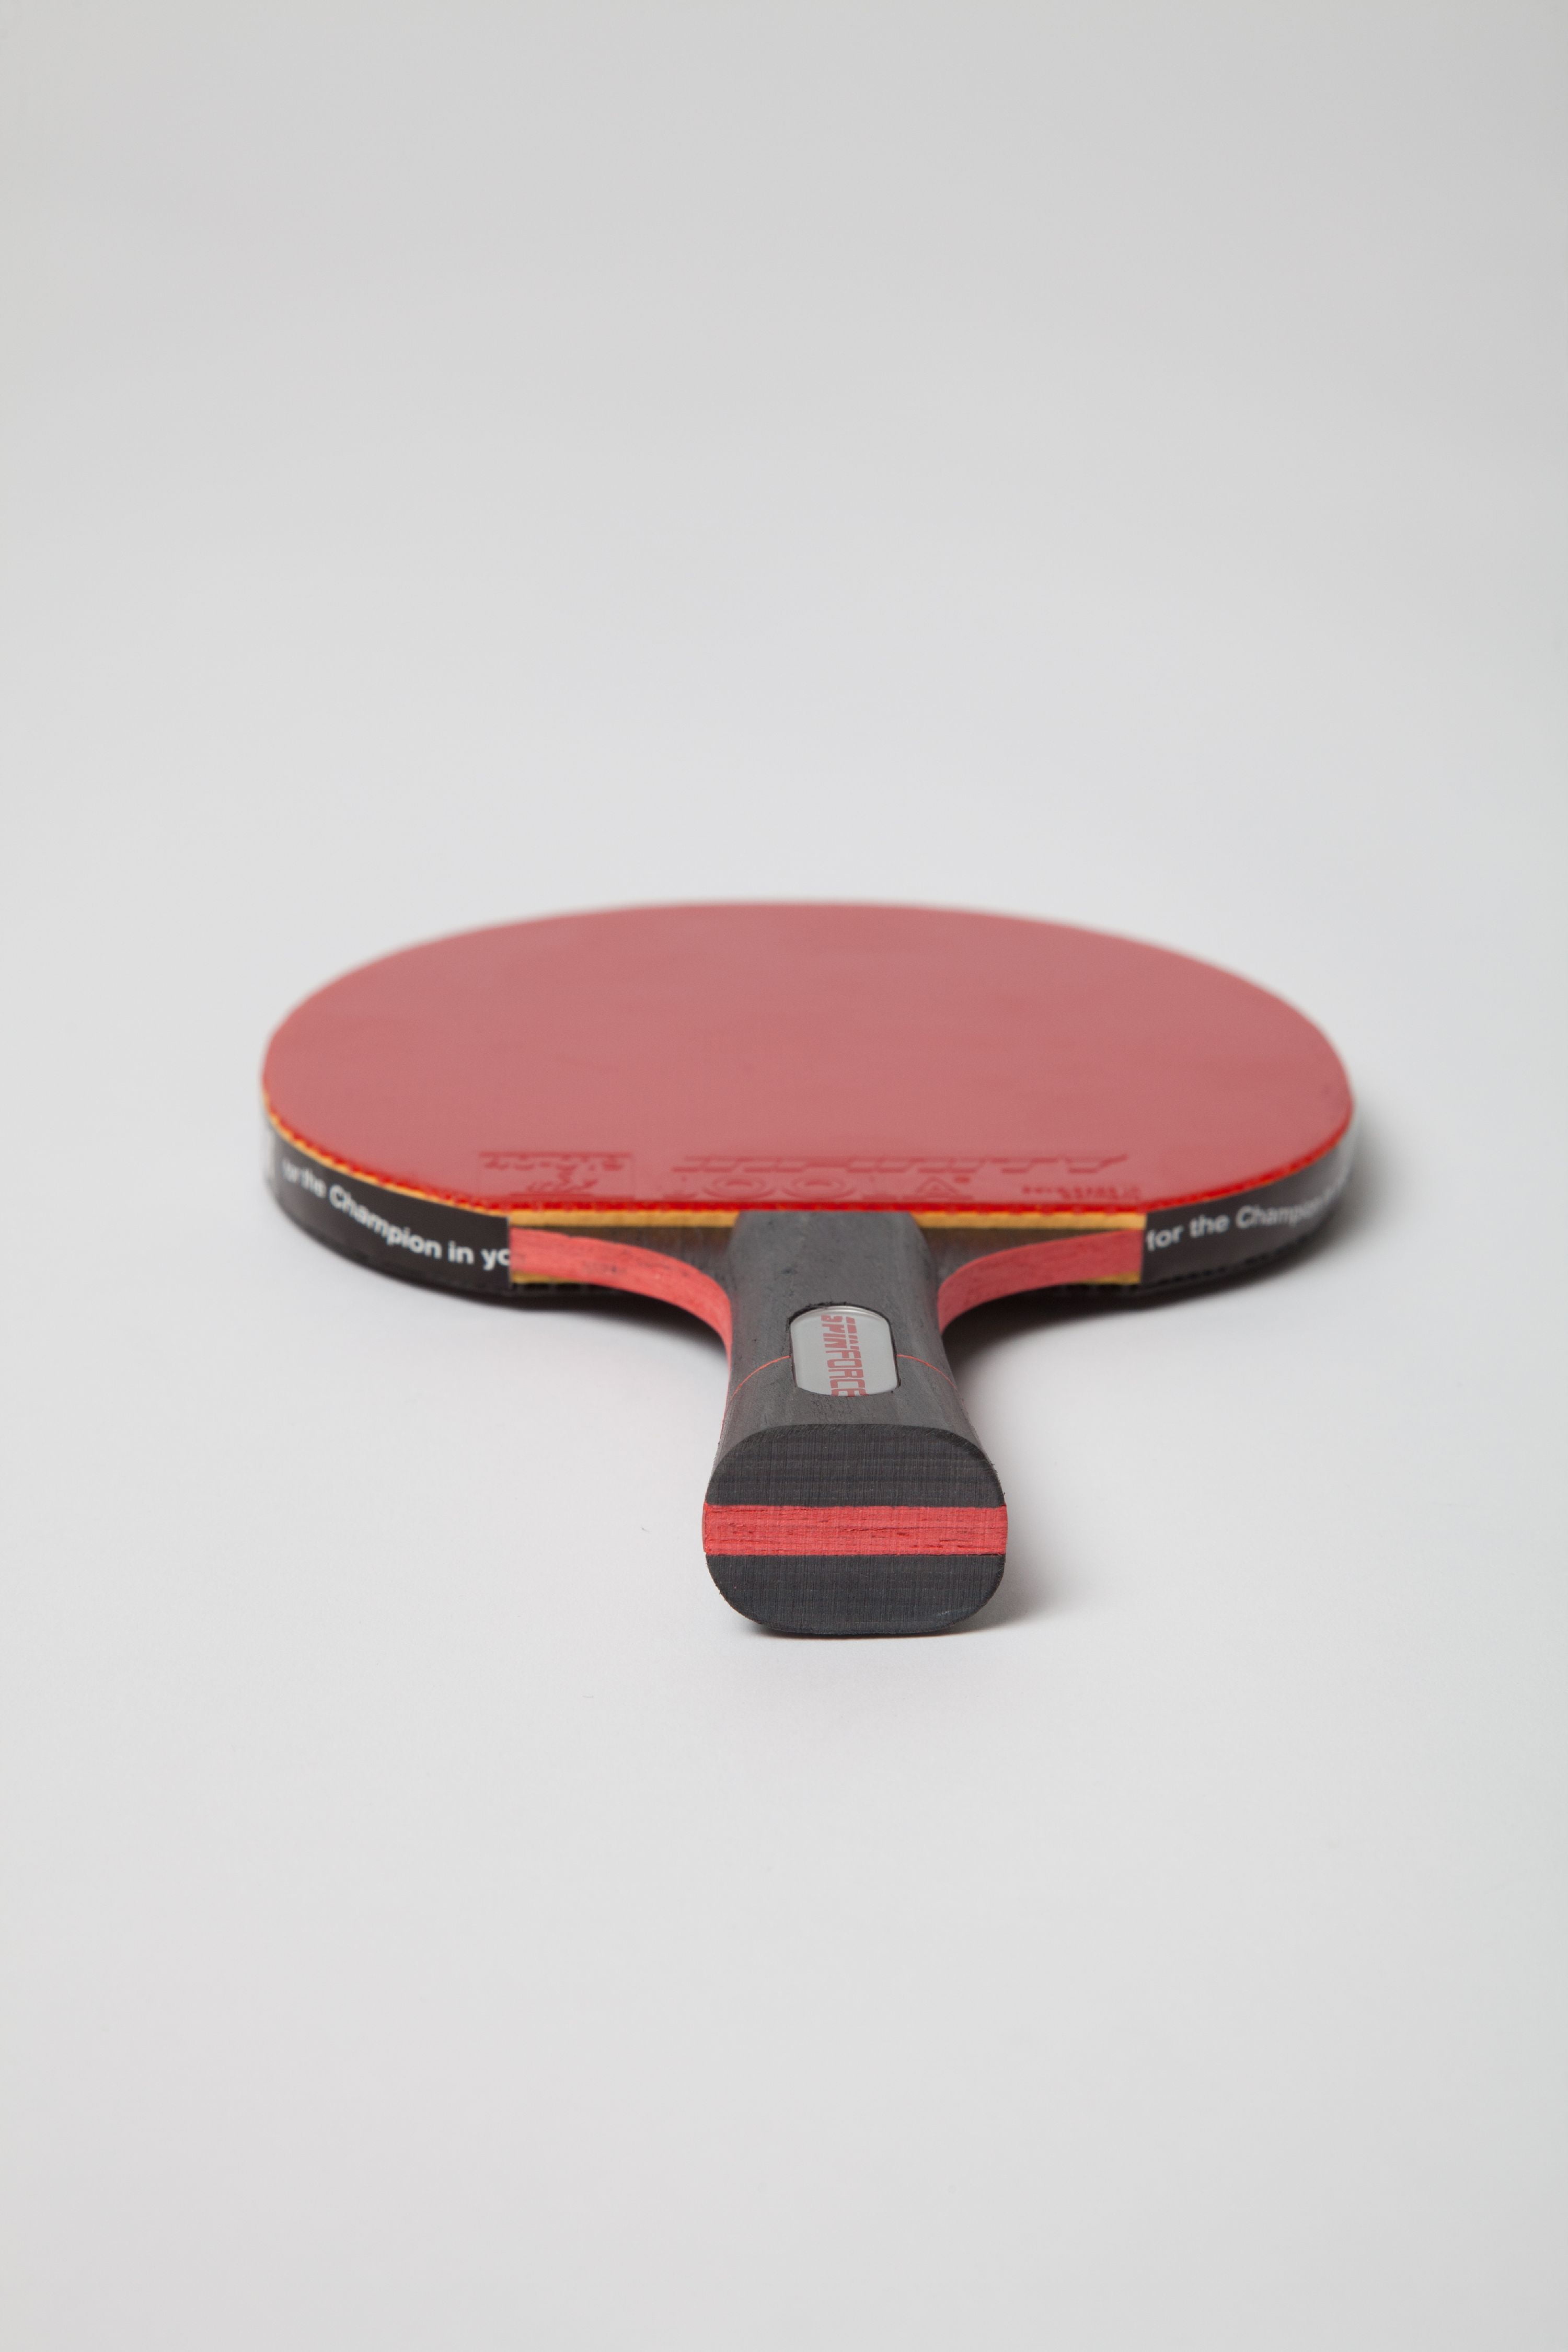 ANDRO Plaxon 450  Rubber Table Tennis Ping Pong HOT! 